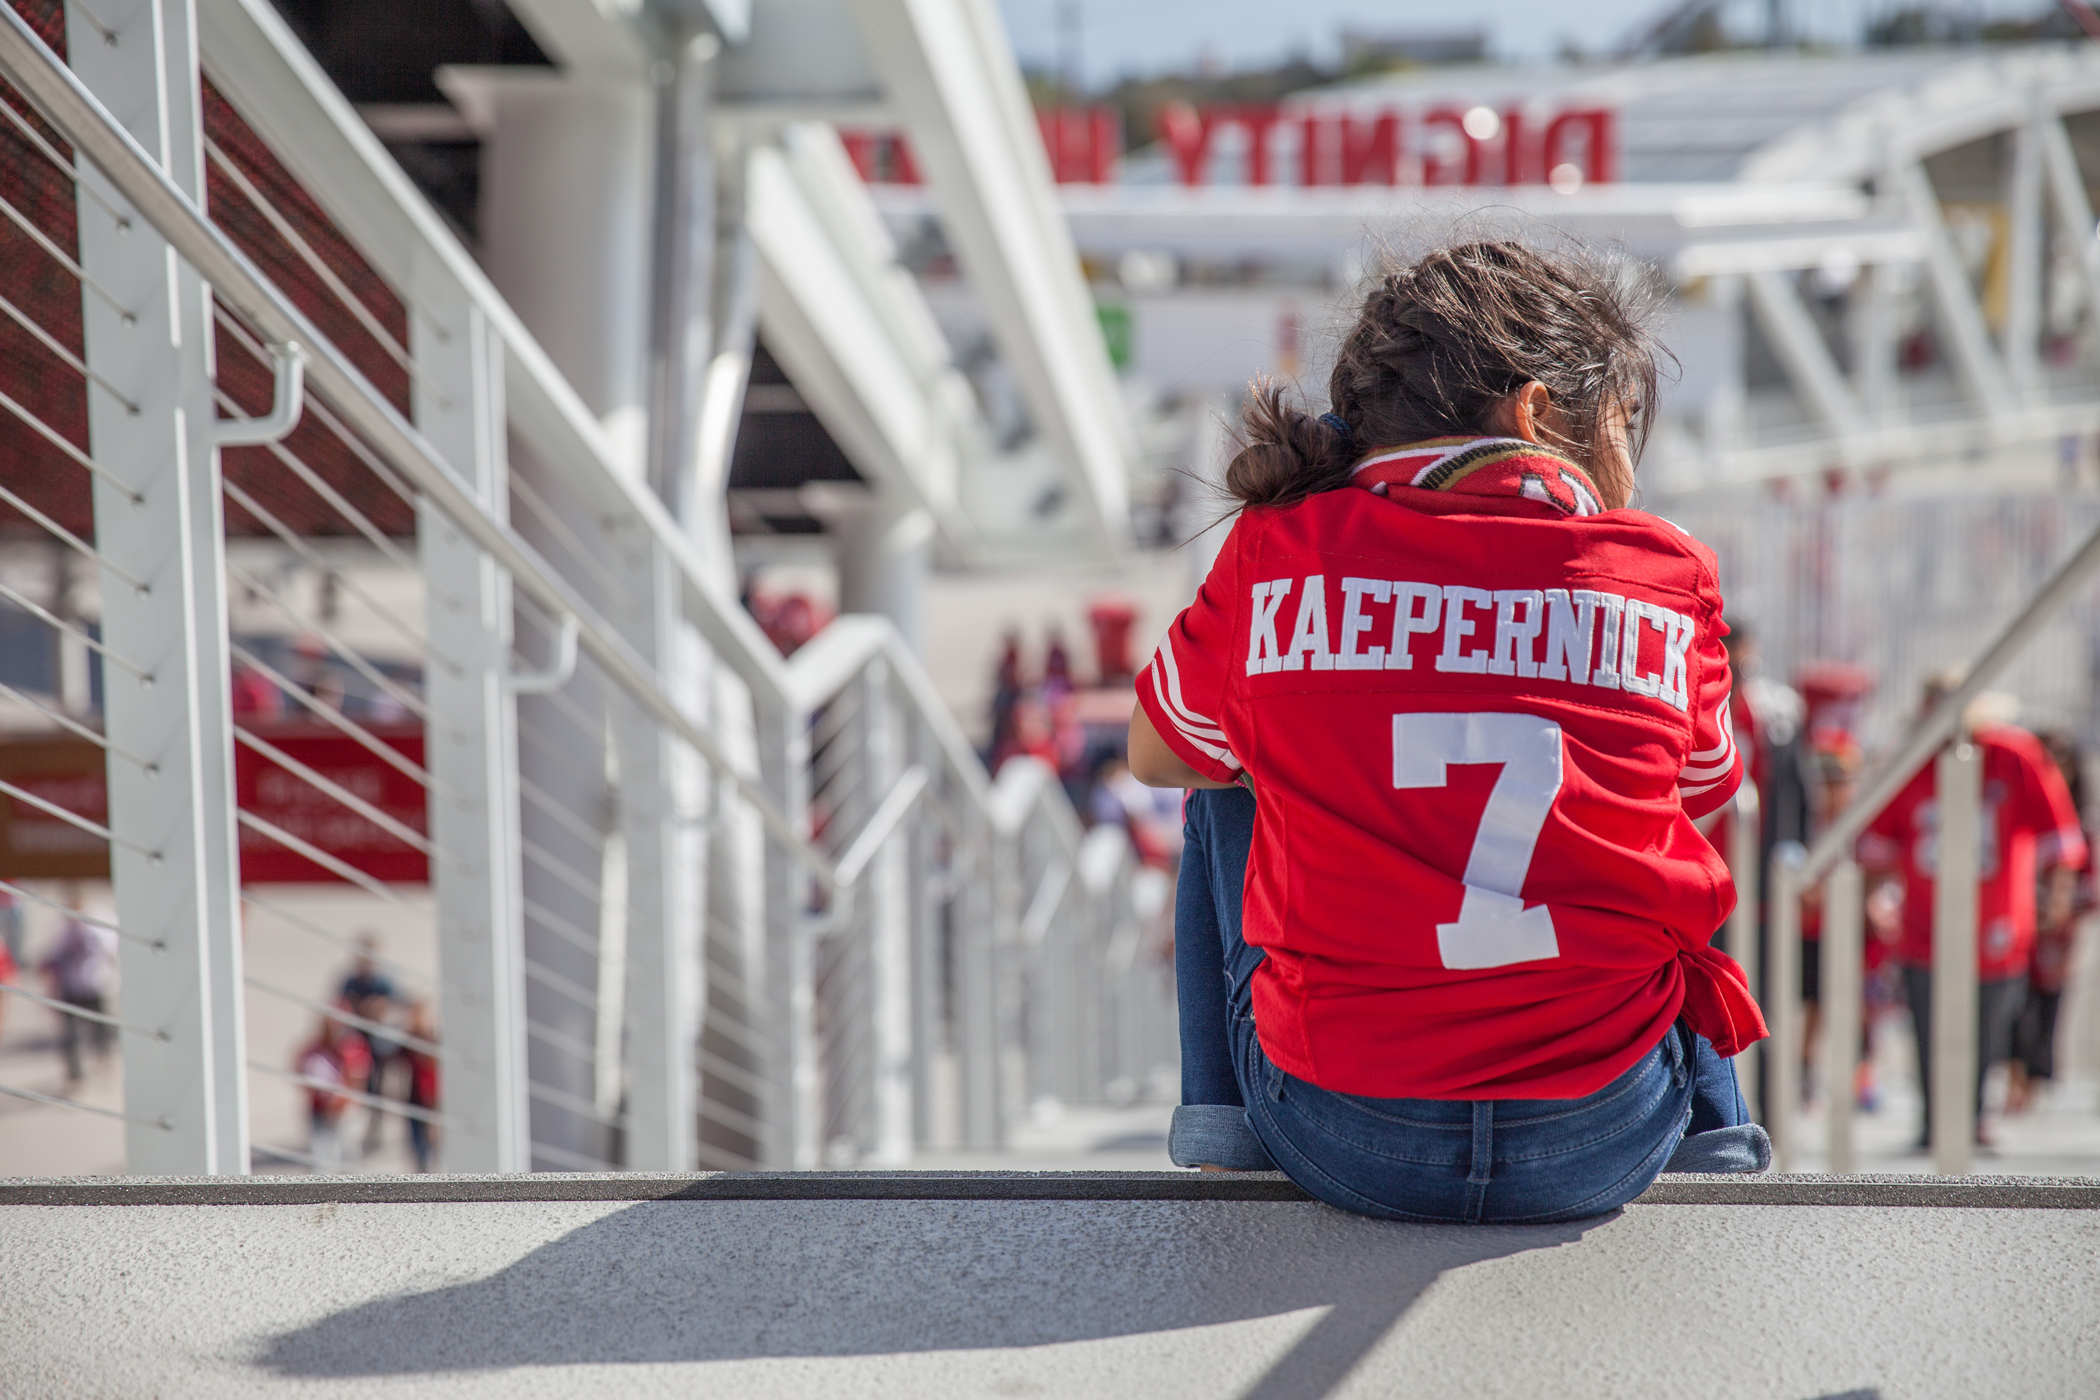 Young girl wearing a Kaepernick jersey sitting in the stands waiting